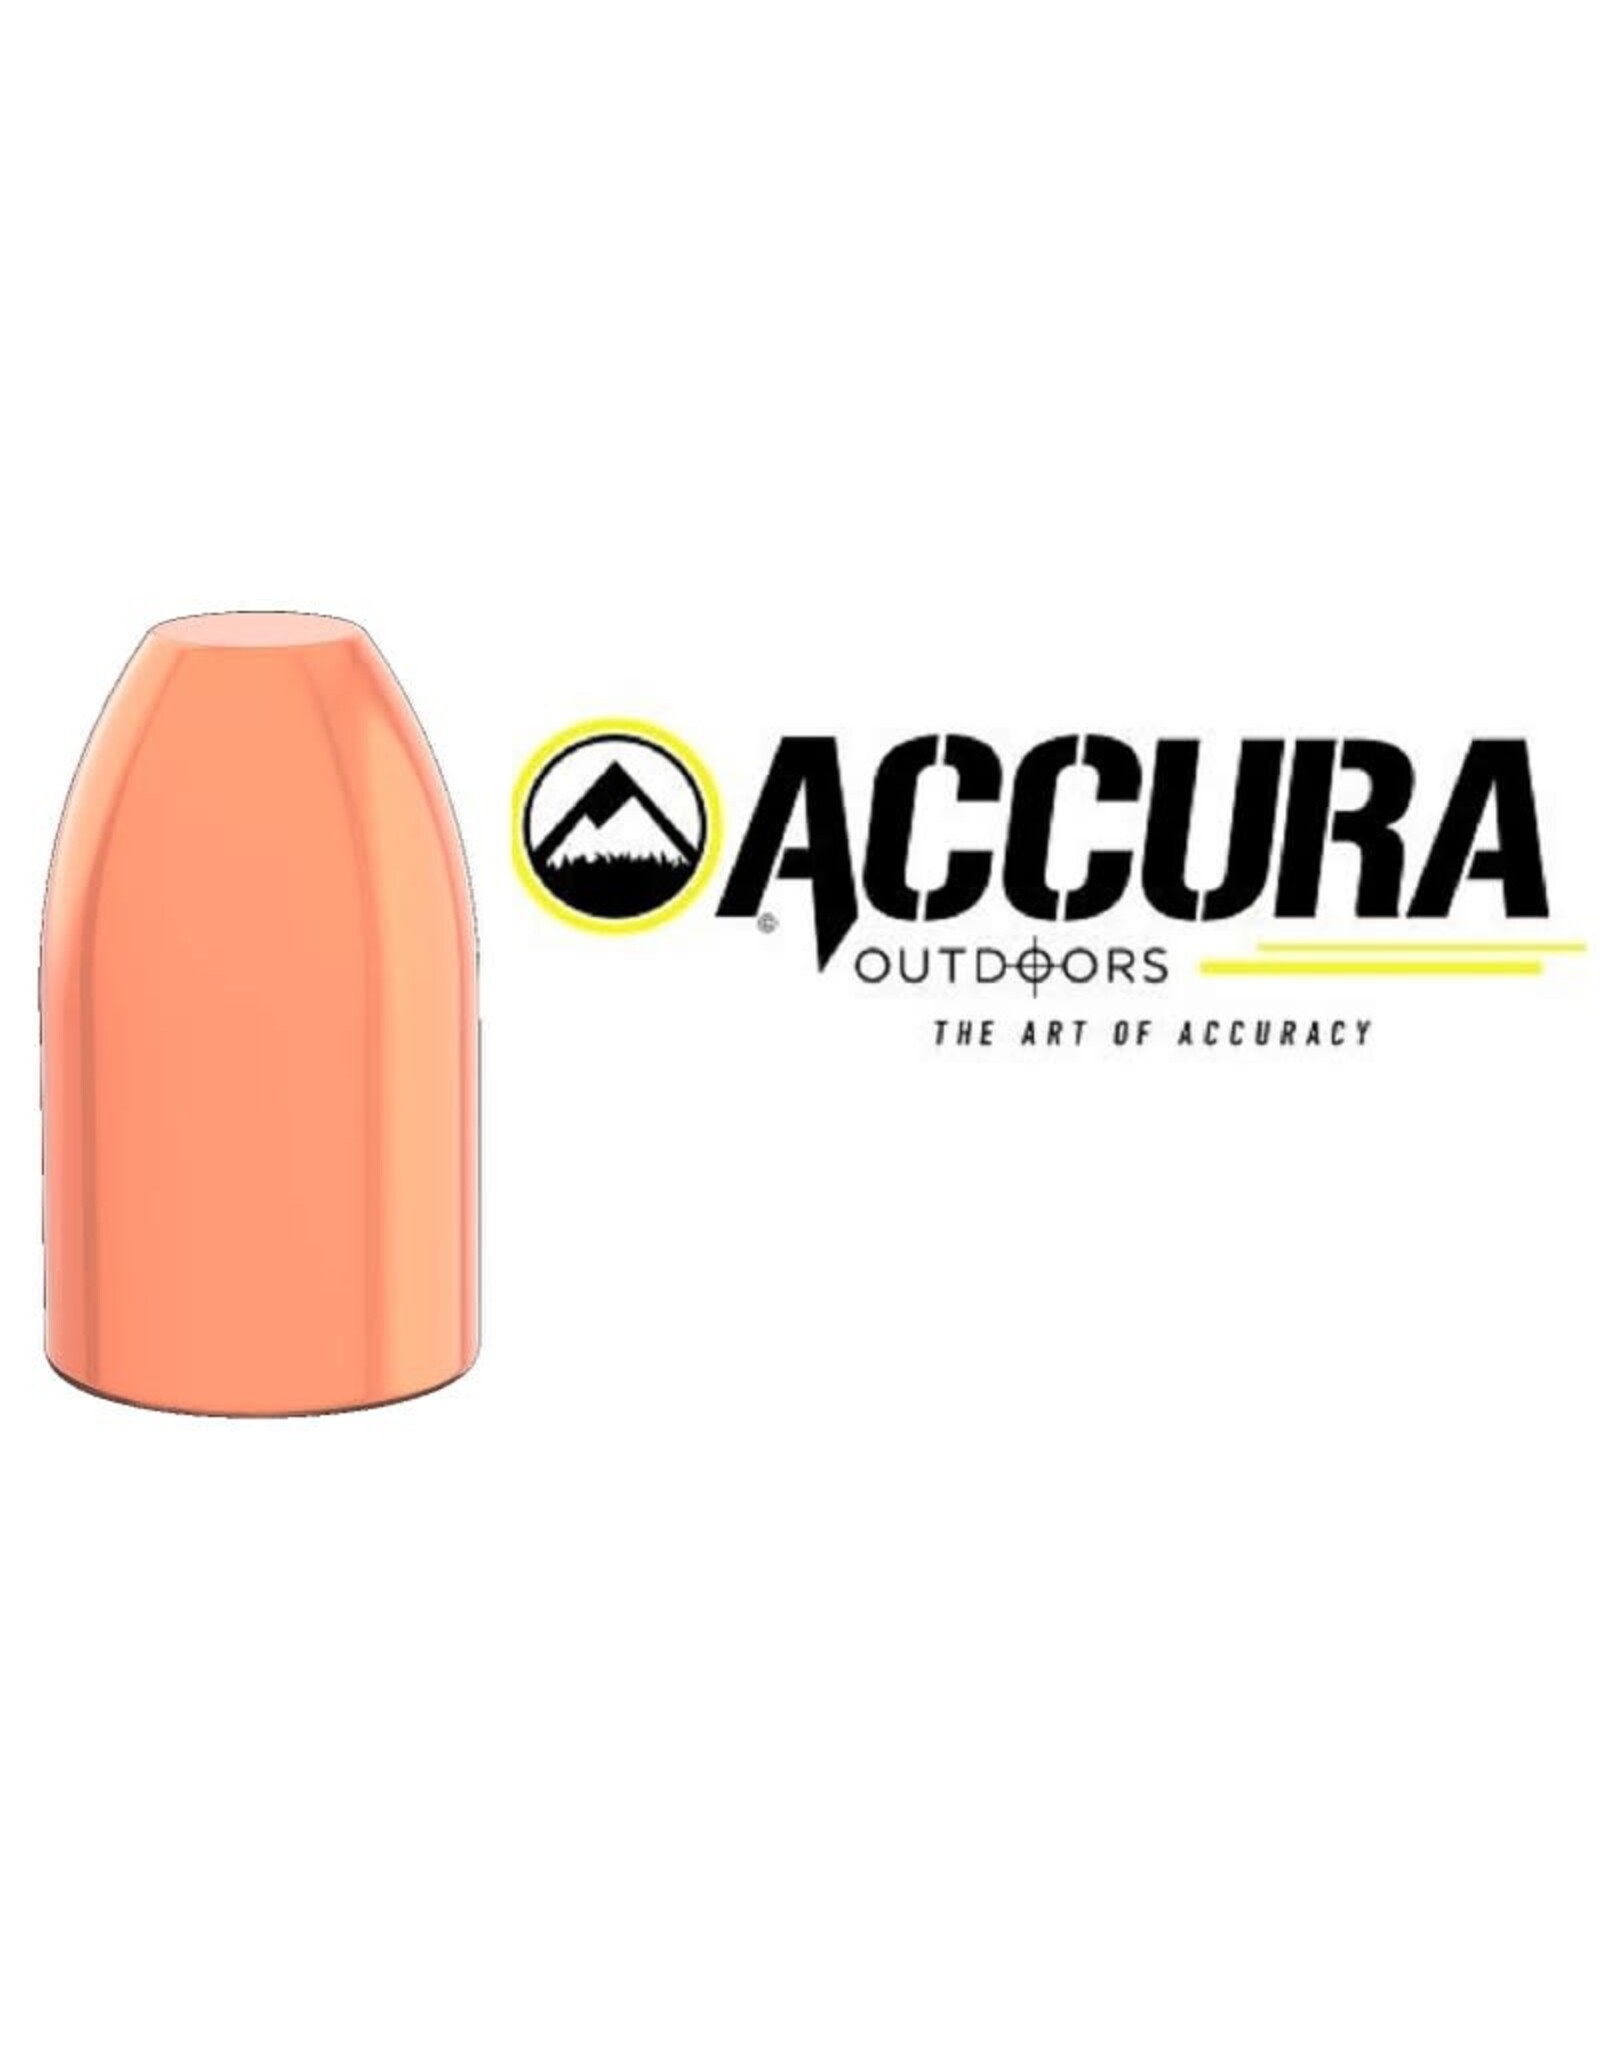 Accura Accura Bullets 9mm 147 GR Flat Point (.355") - 500 Count